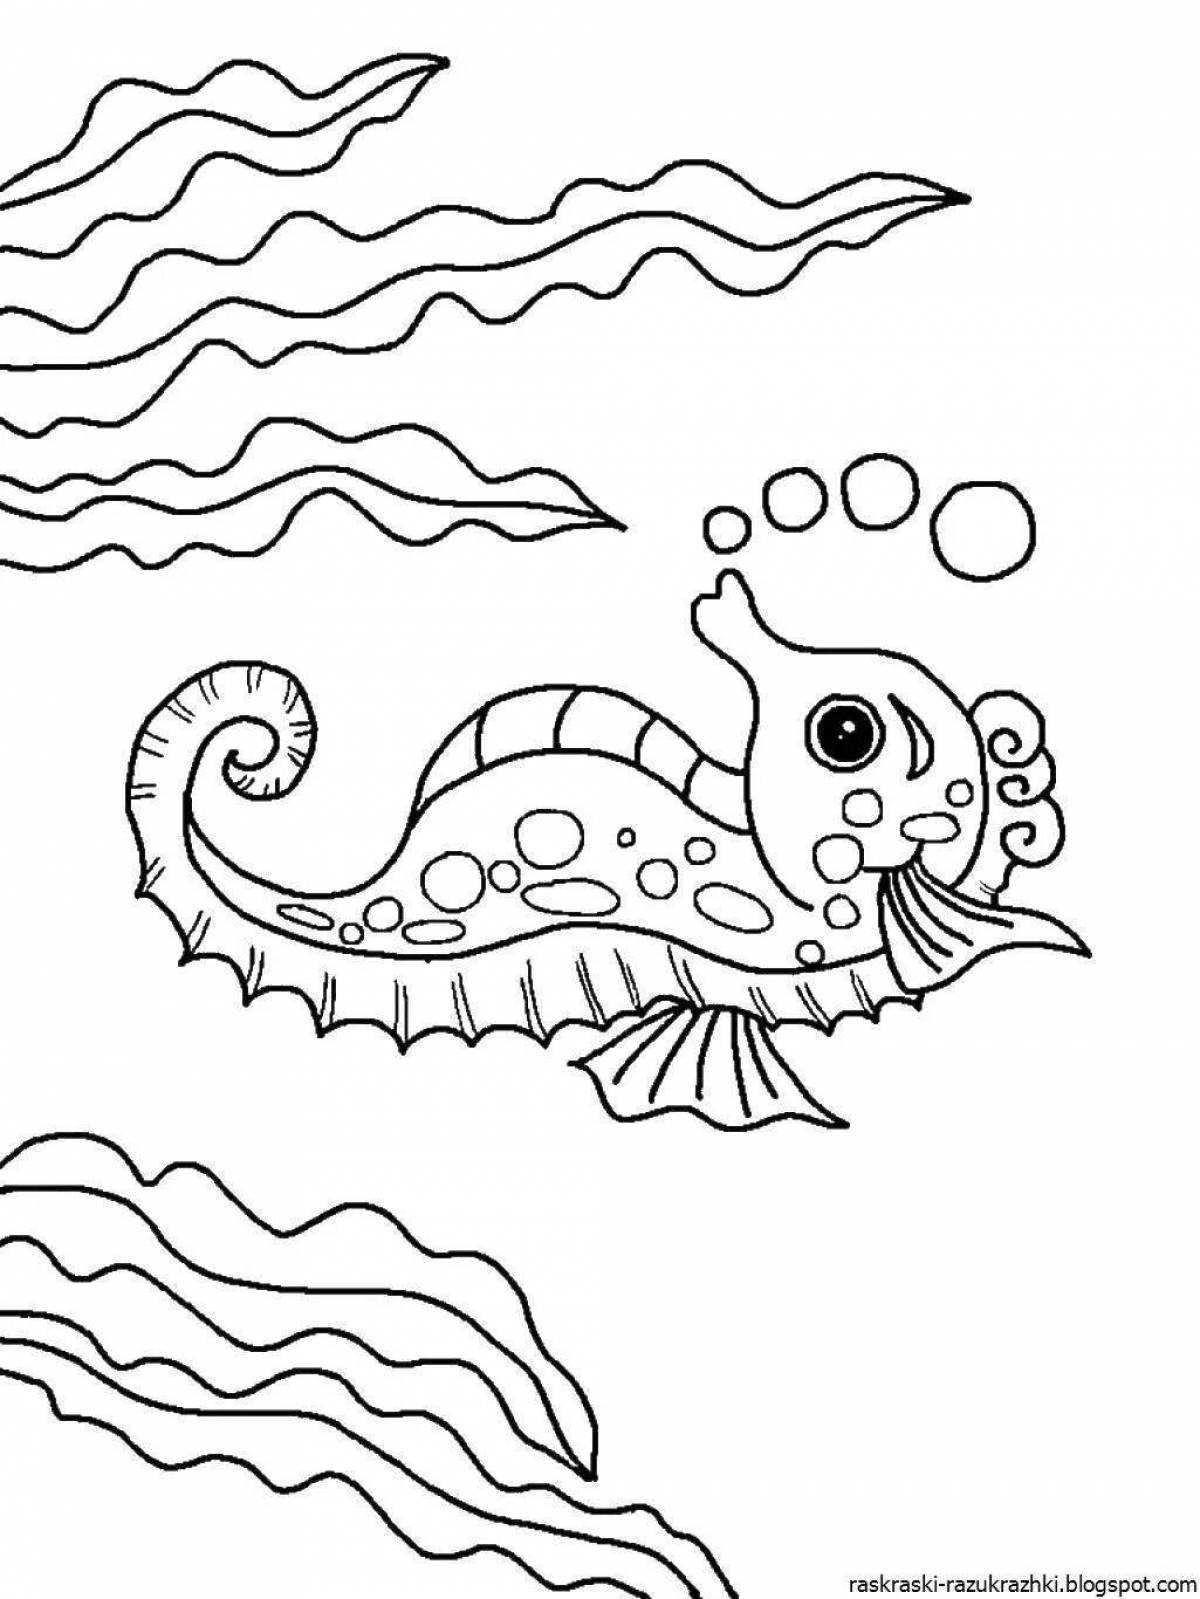 Whimsical coloring of the inhabitants of the seas and oceans for children